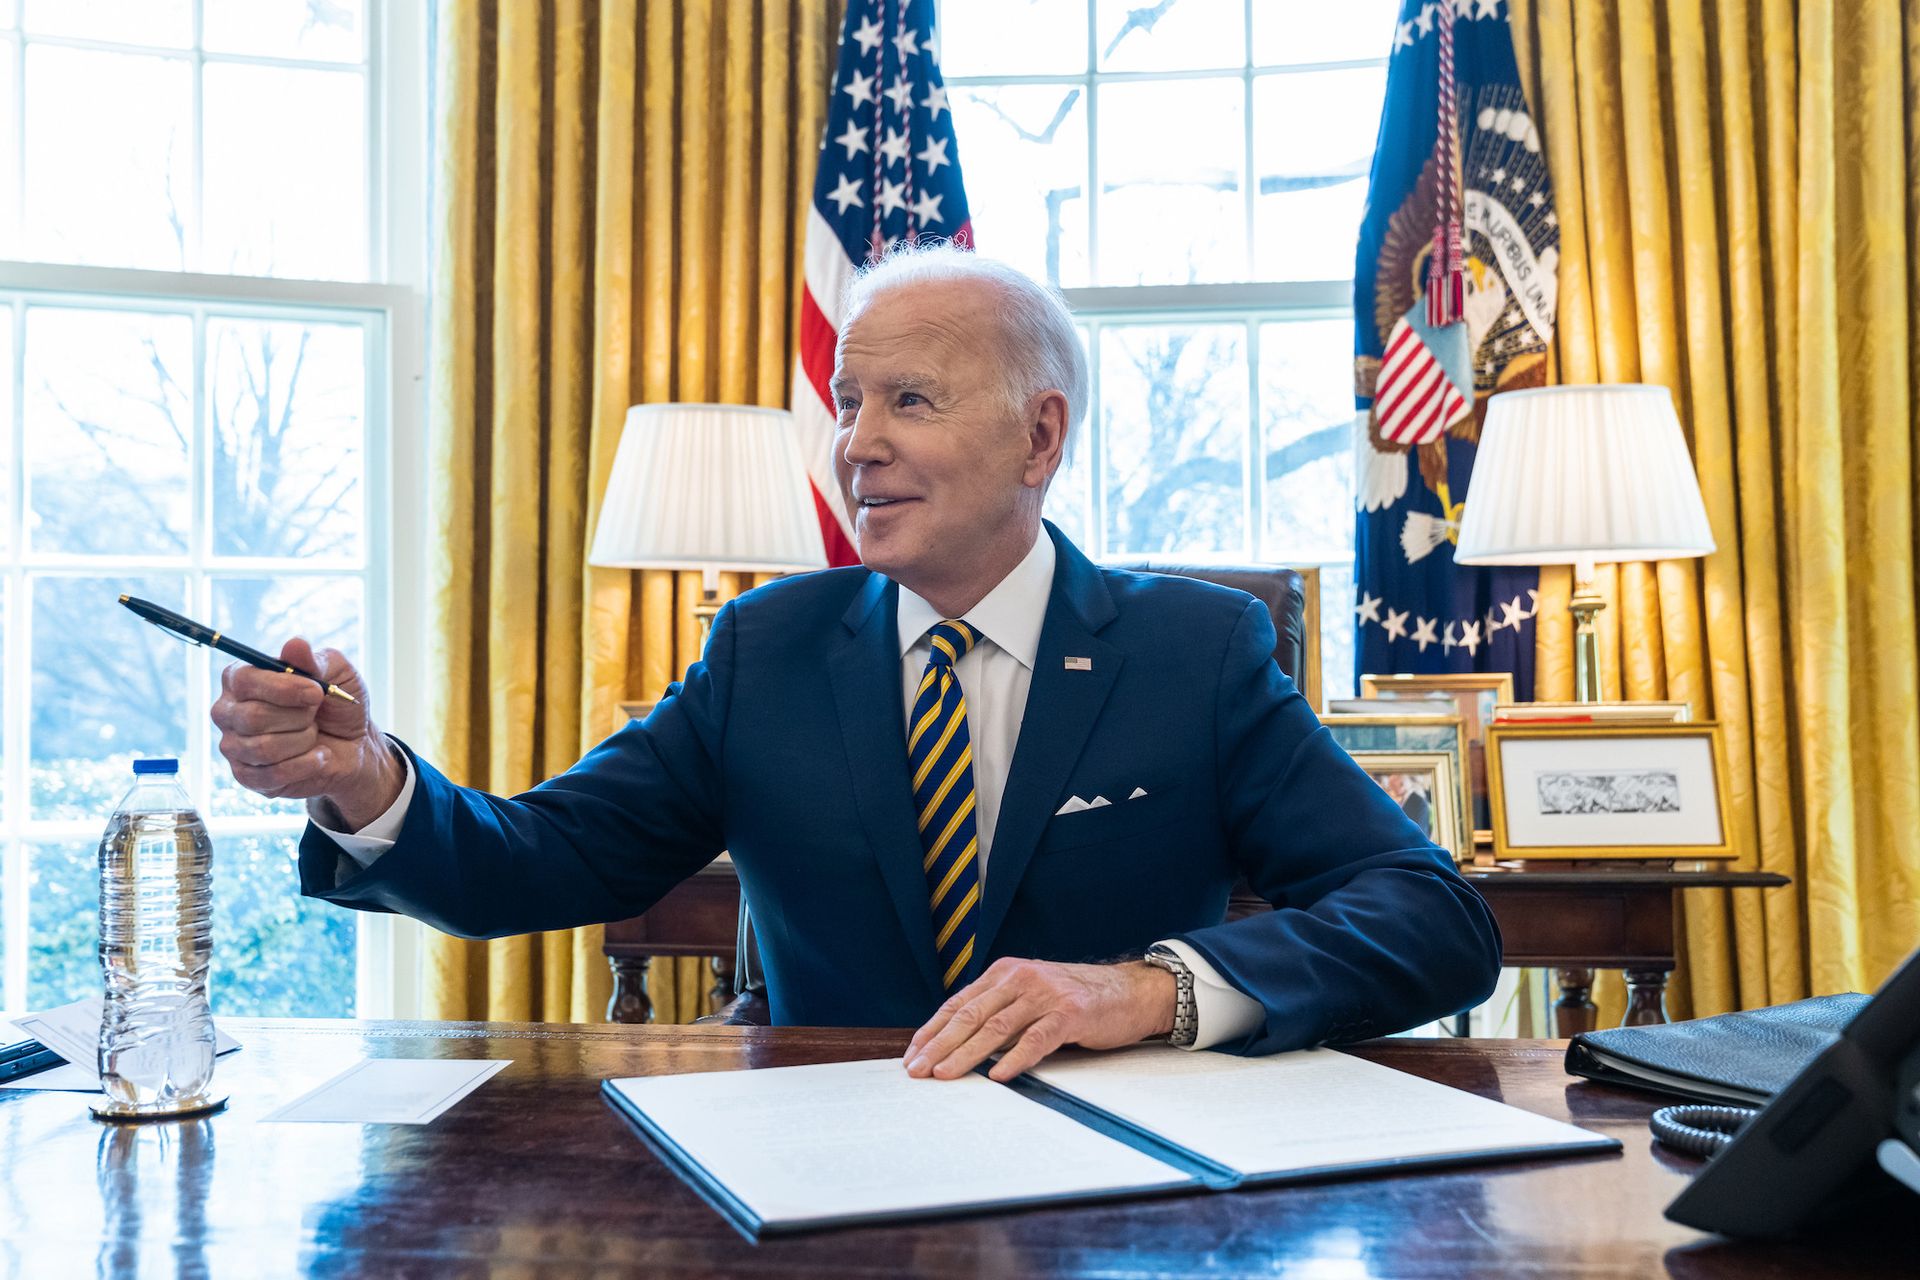 US president Joseph R. Biden in the Oval Office on 8 March 2022 Official White House Photo by Cameron Smith, via Flickr